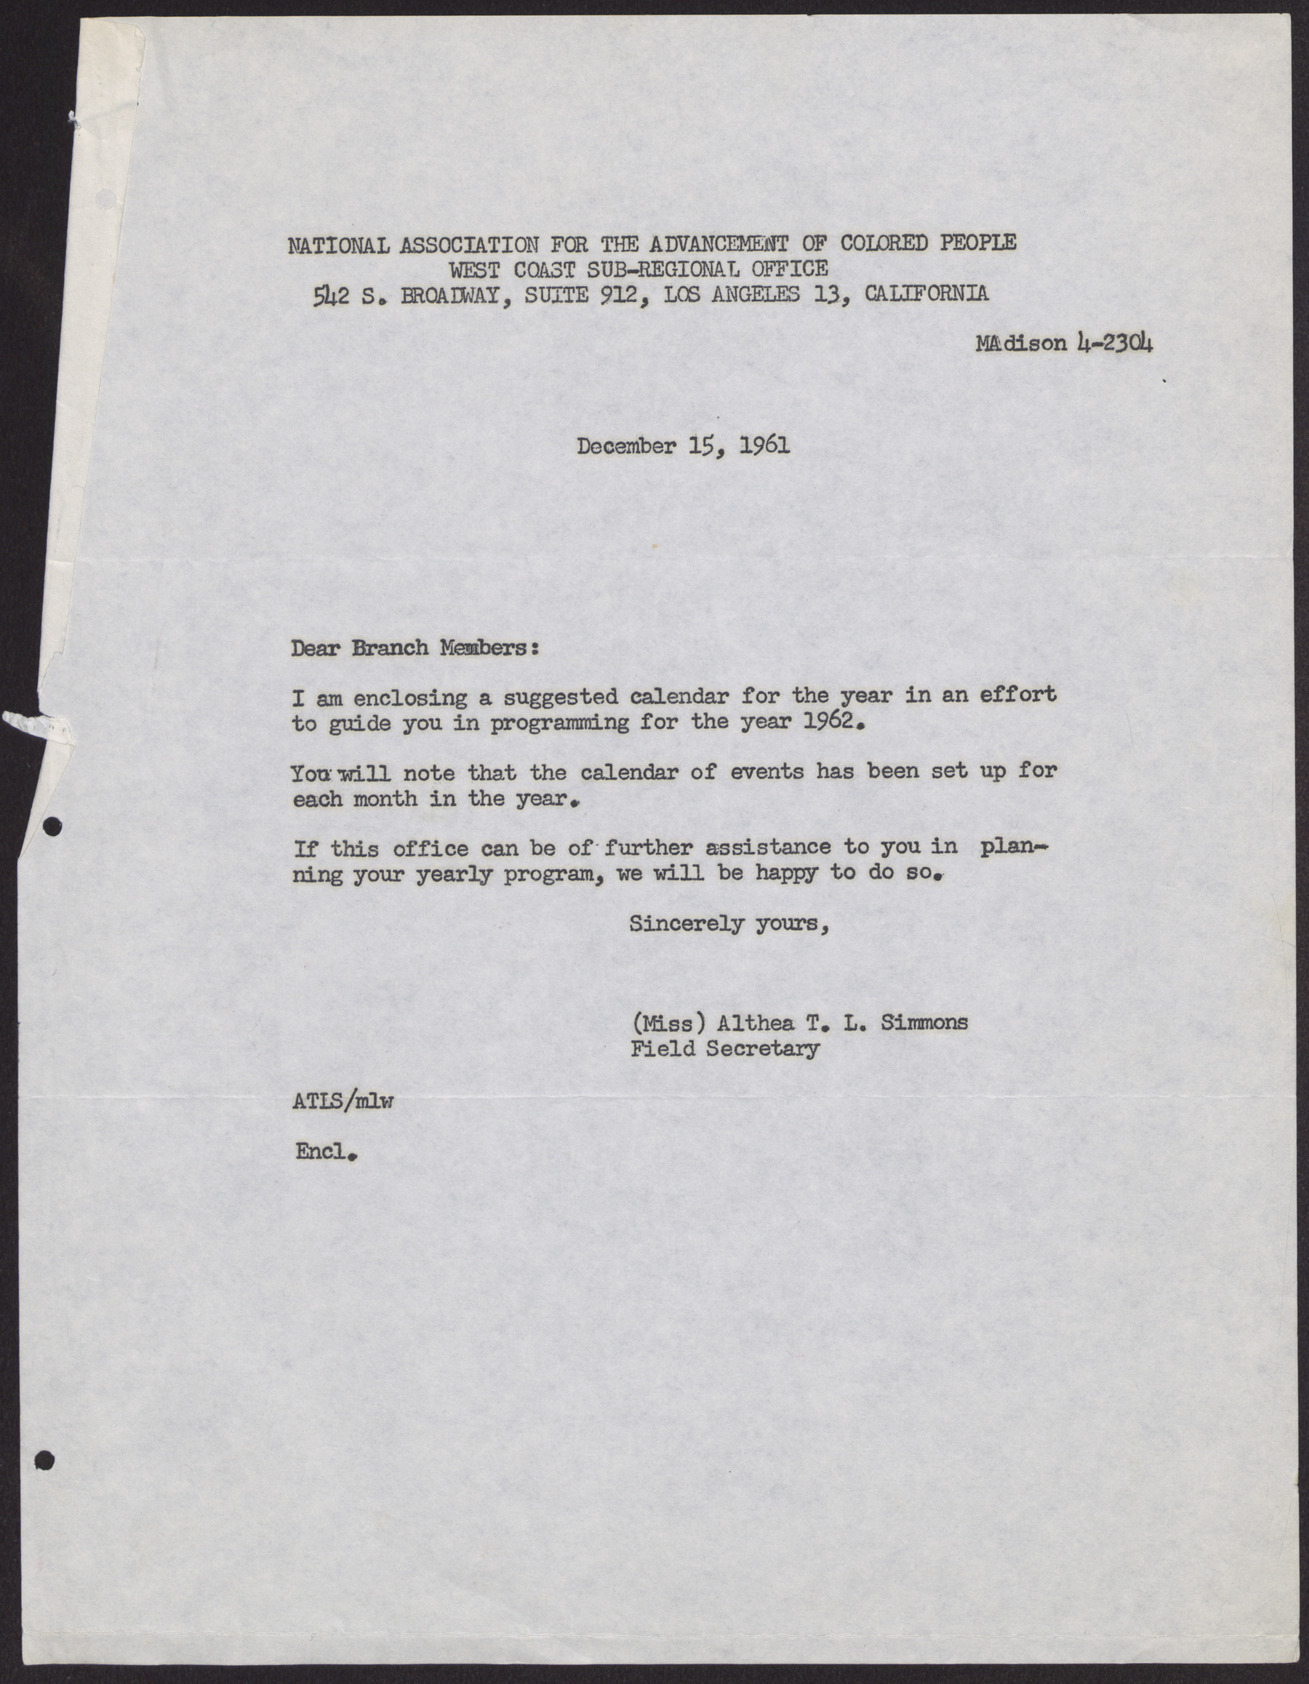 Letter and suggested calendar for 1962 to NAACP Branch members from Althea T. L. Simmons (2 pages), December 15, 1961